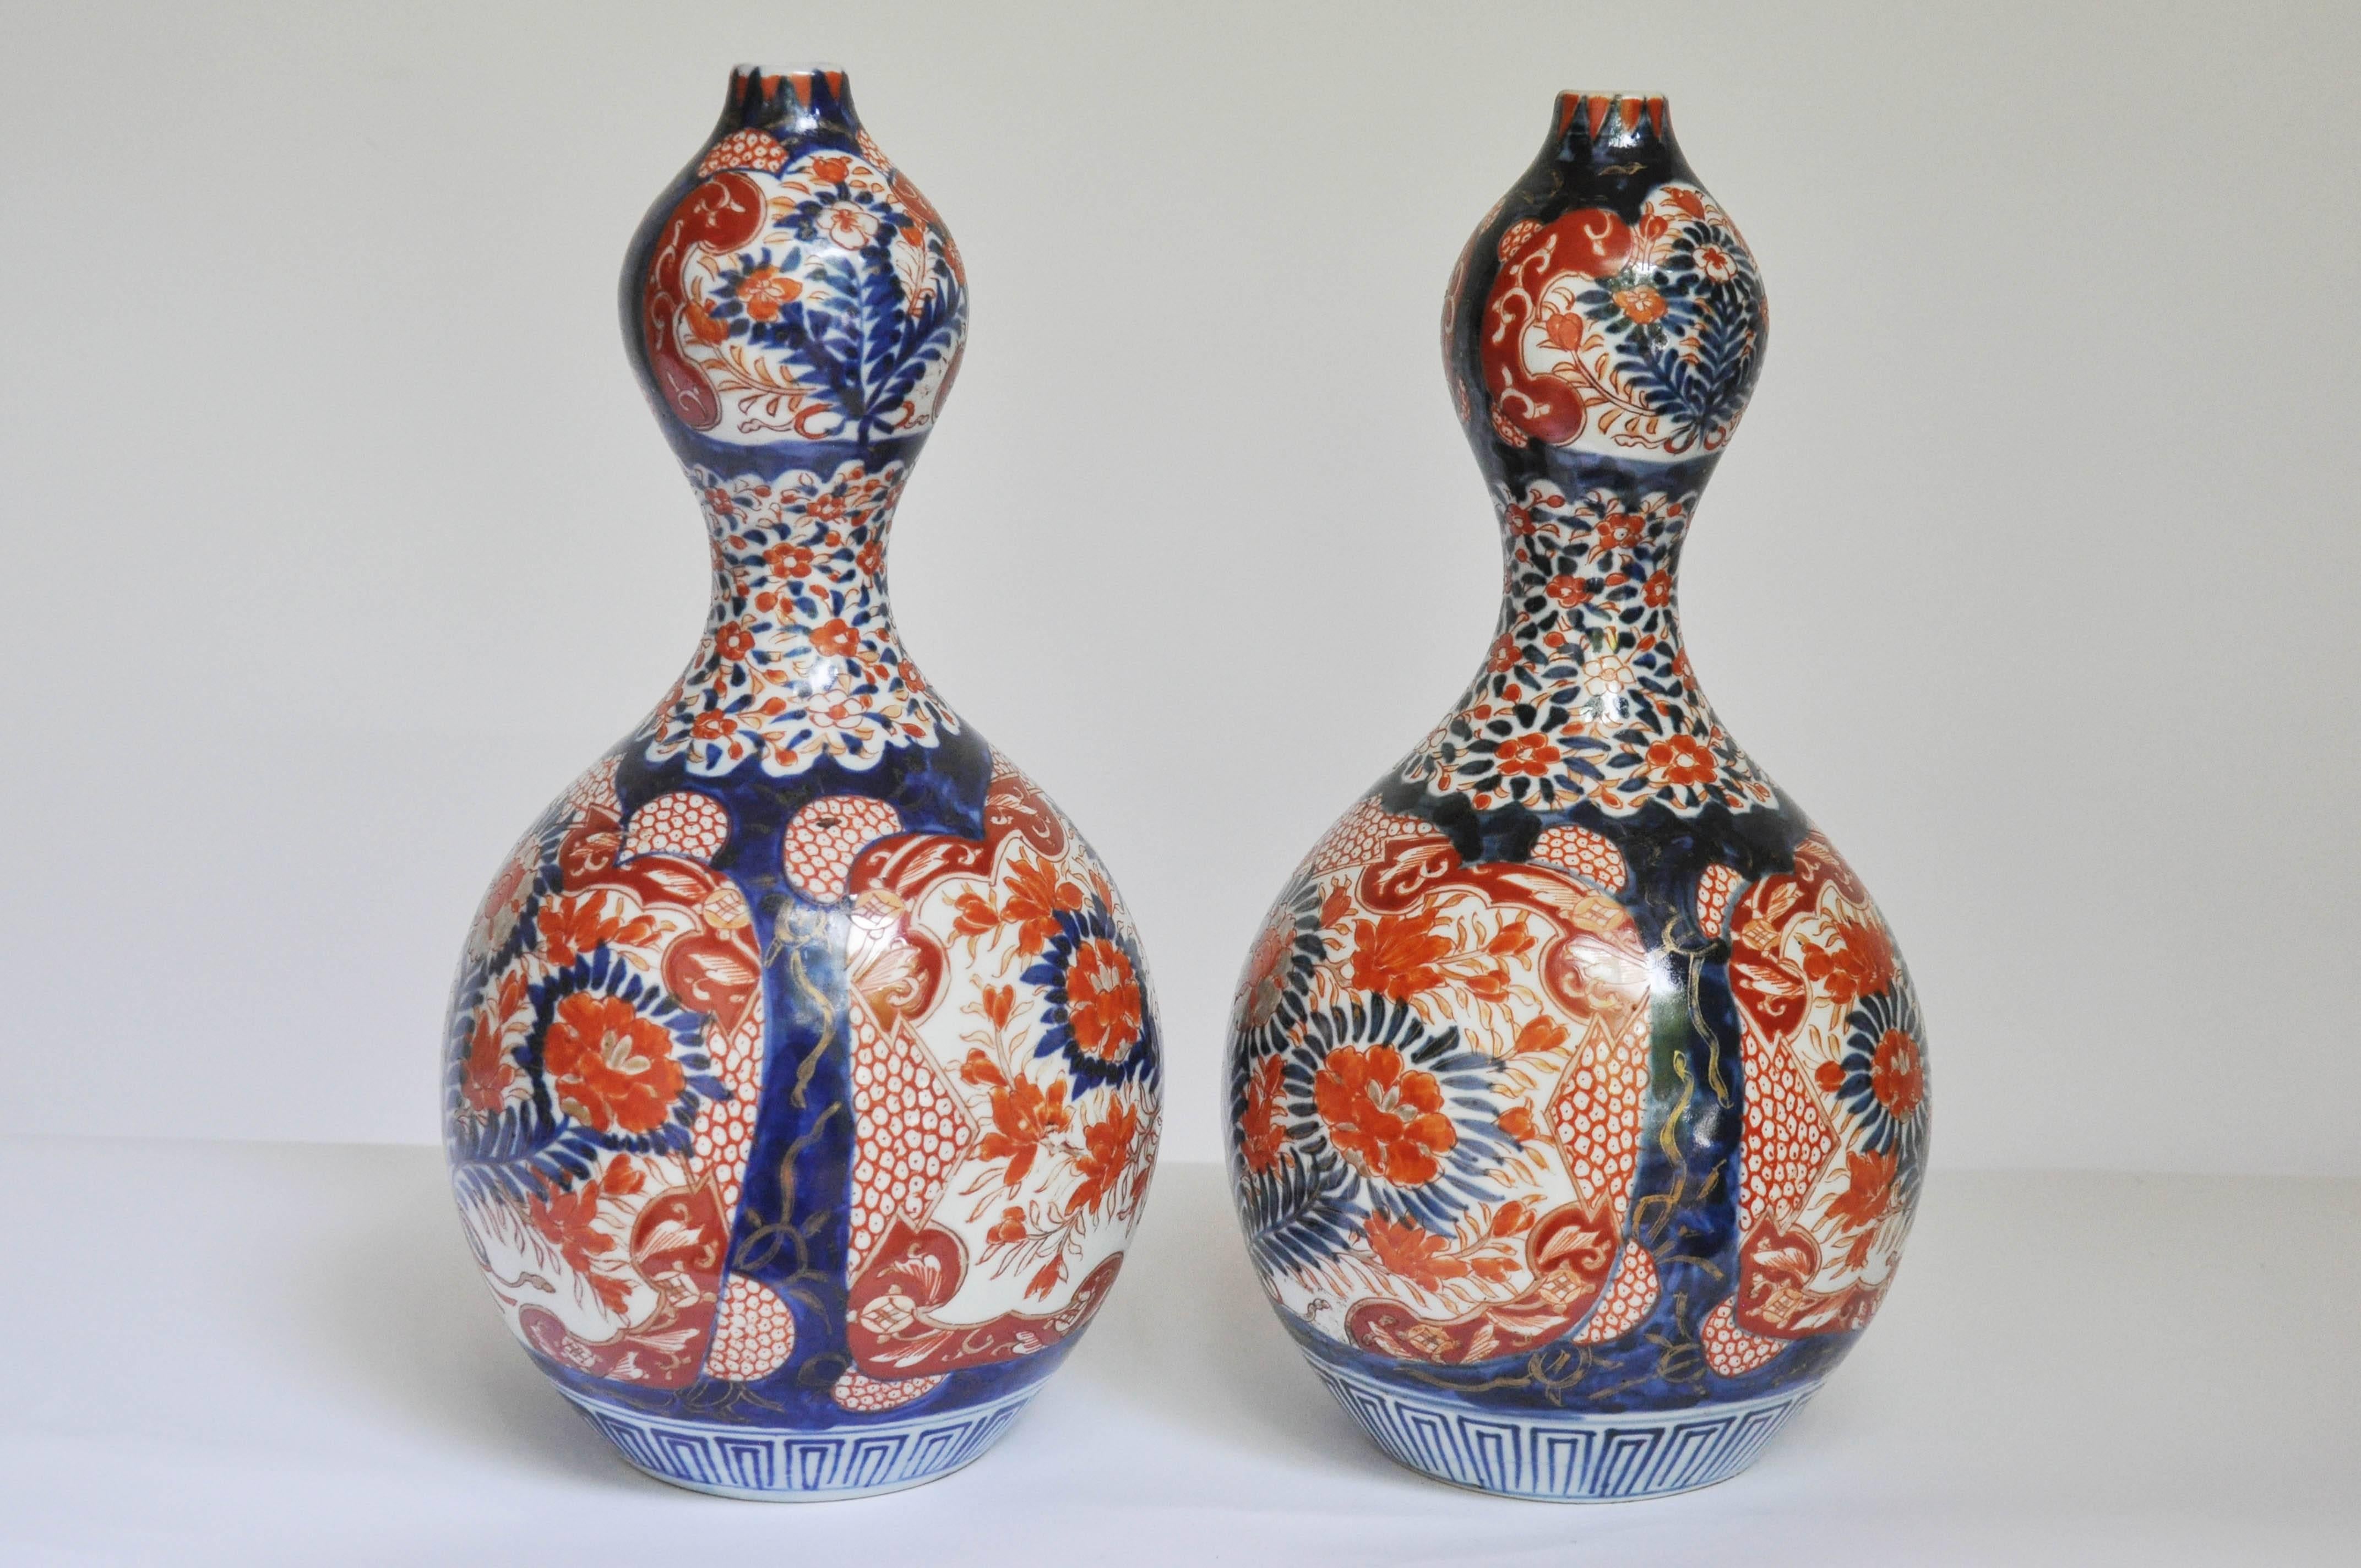 An extraordinary very rare pair of Arita porcelain double gourd garnitures. Using the original Gosai pattern, each vase is a mirror image of the other both sides of the lower bulge are detailed with Arita-red glazed chrysanthemums and peonies all